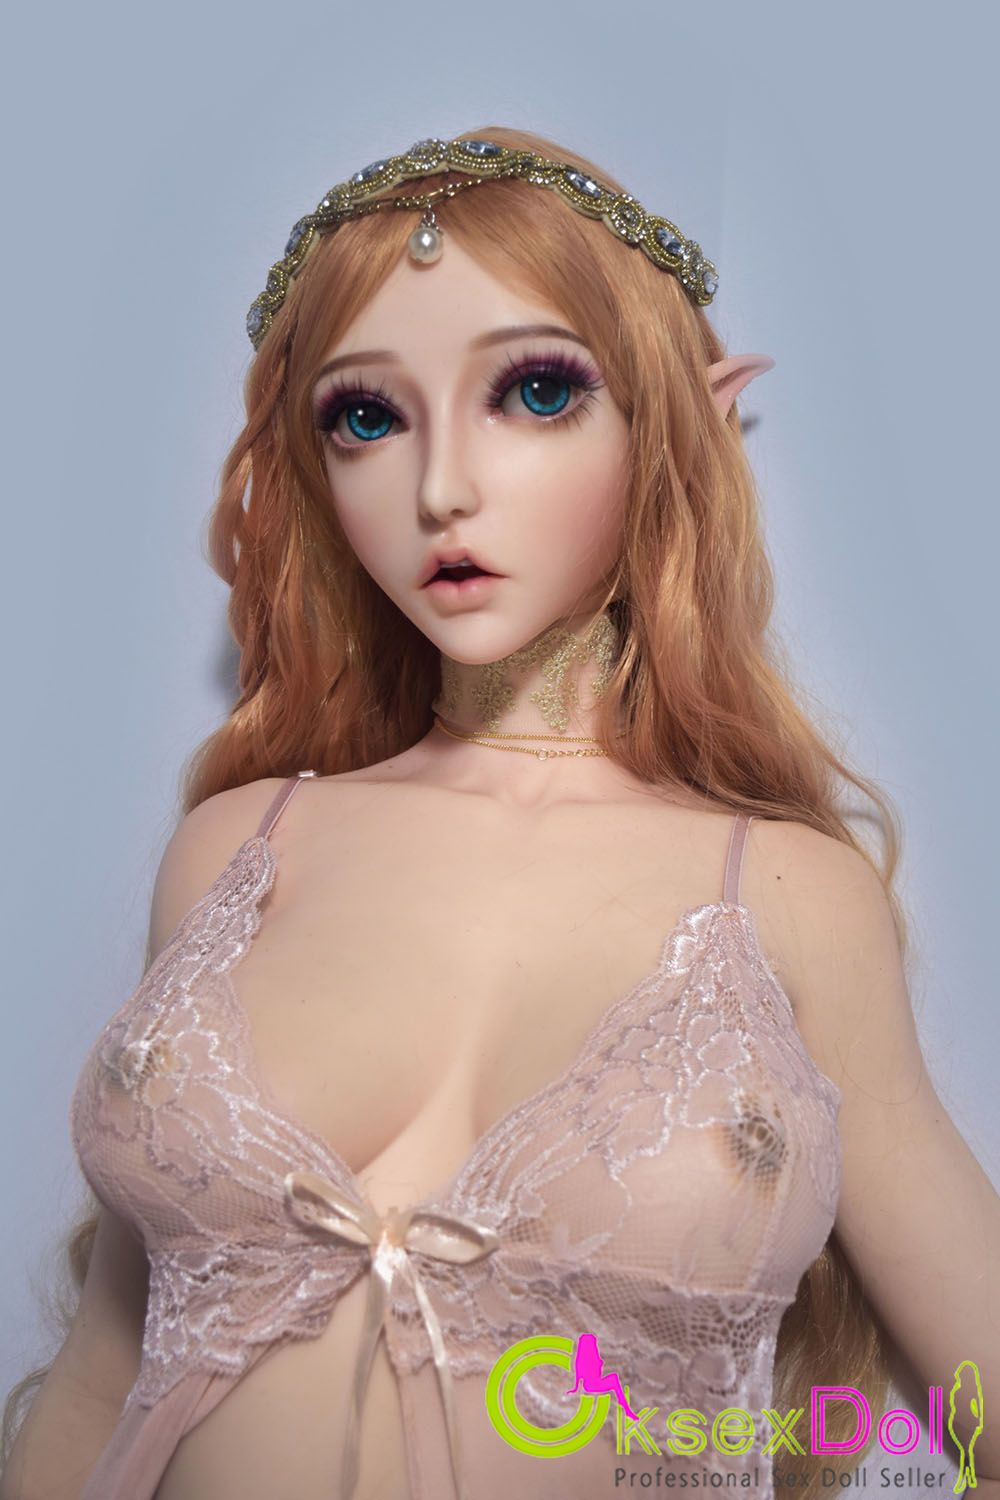 Most Realistic Silicone Sex Doll pic